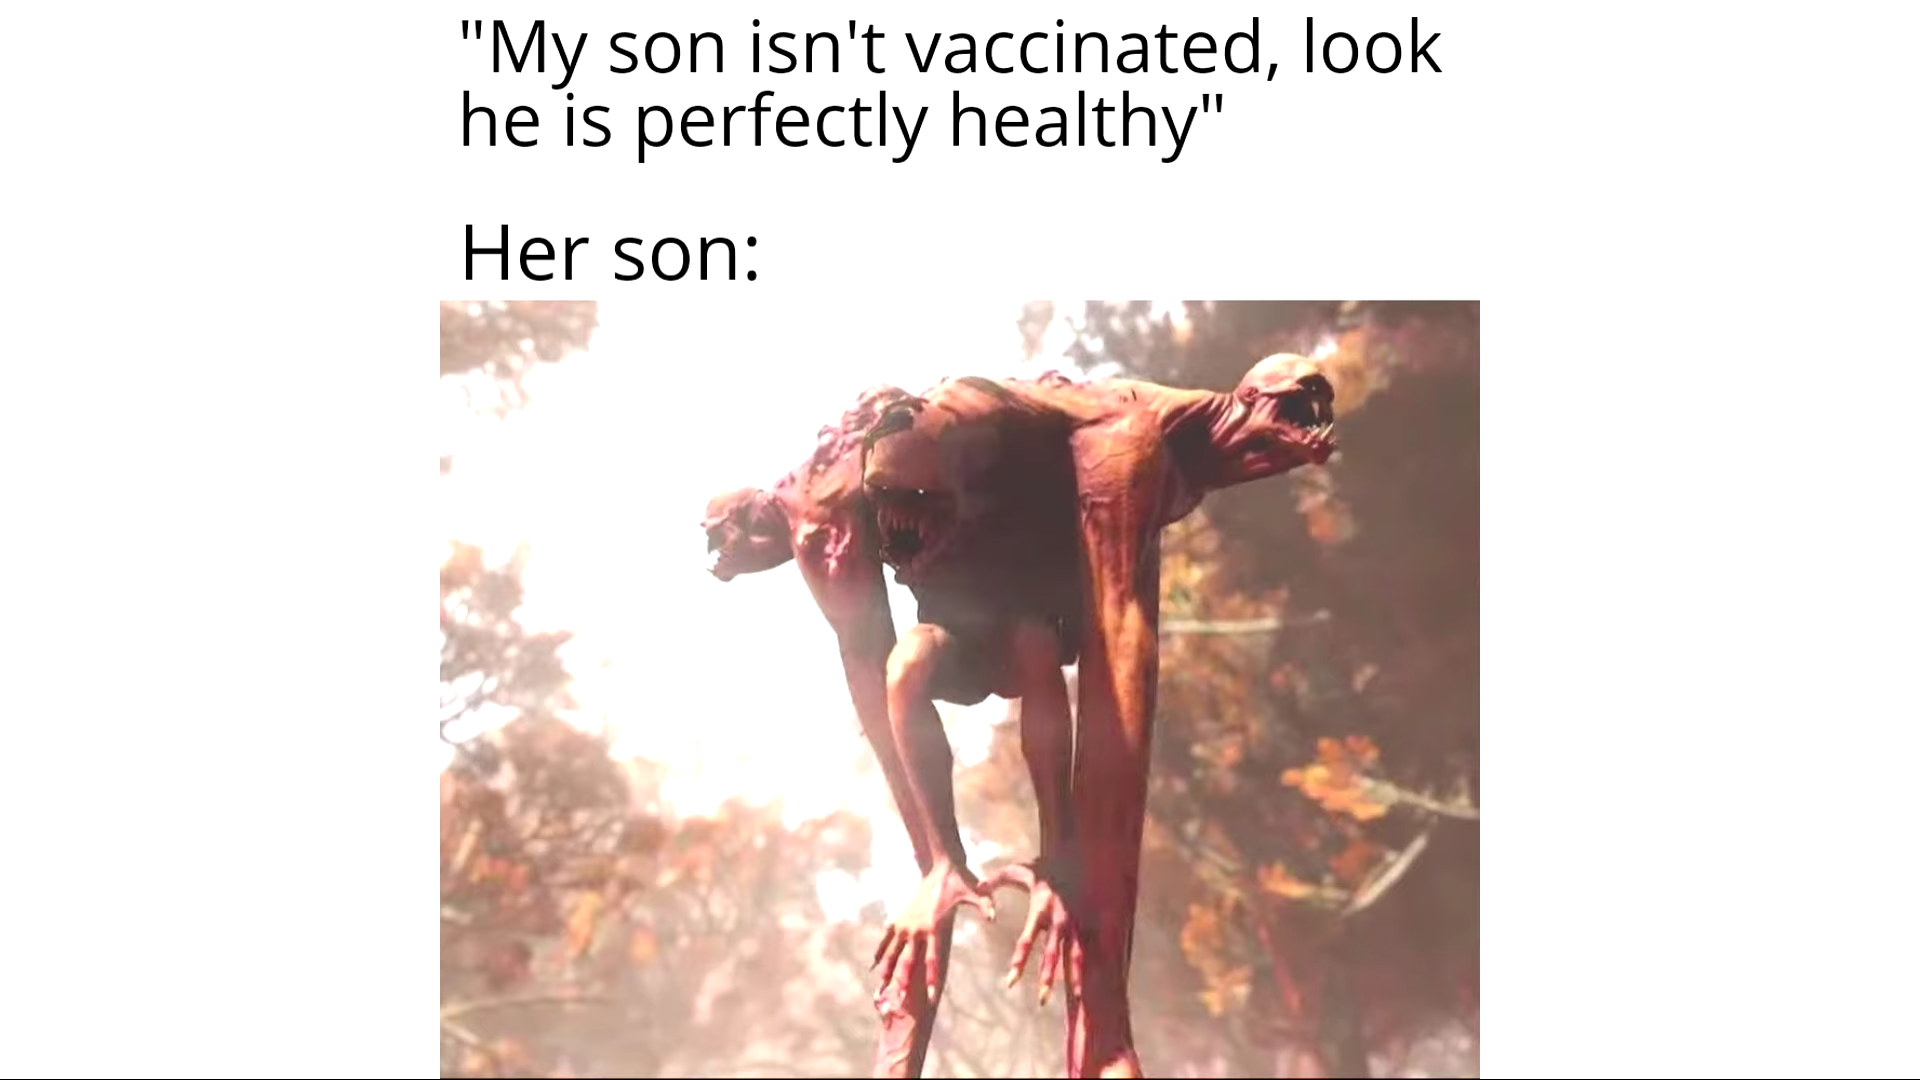 anti-vaxx memes that say, heat - "My son isn't vaccinated, look he is perfectly healthy" Her son